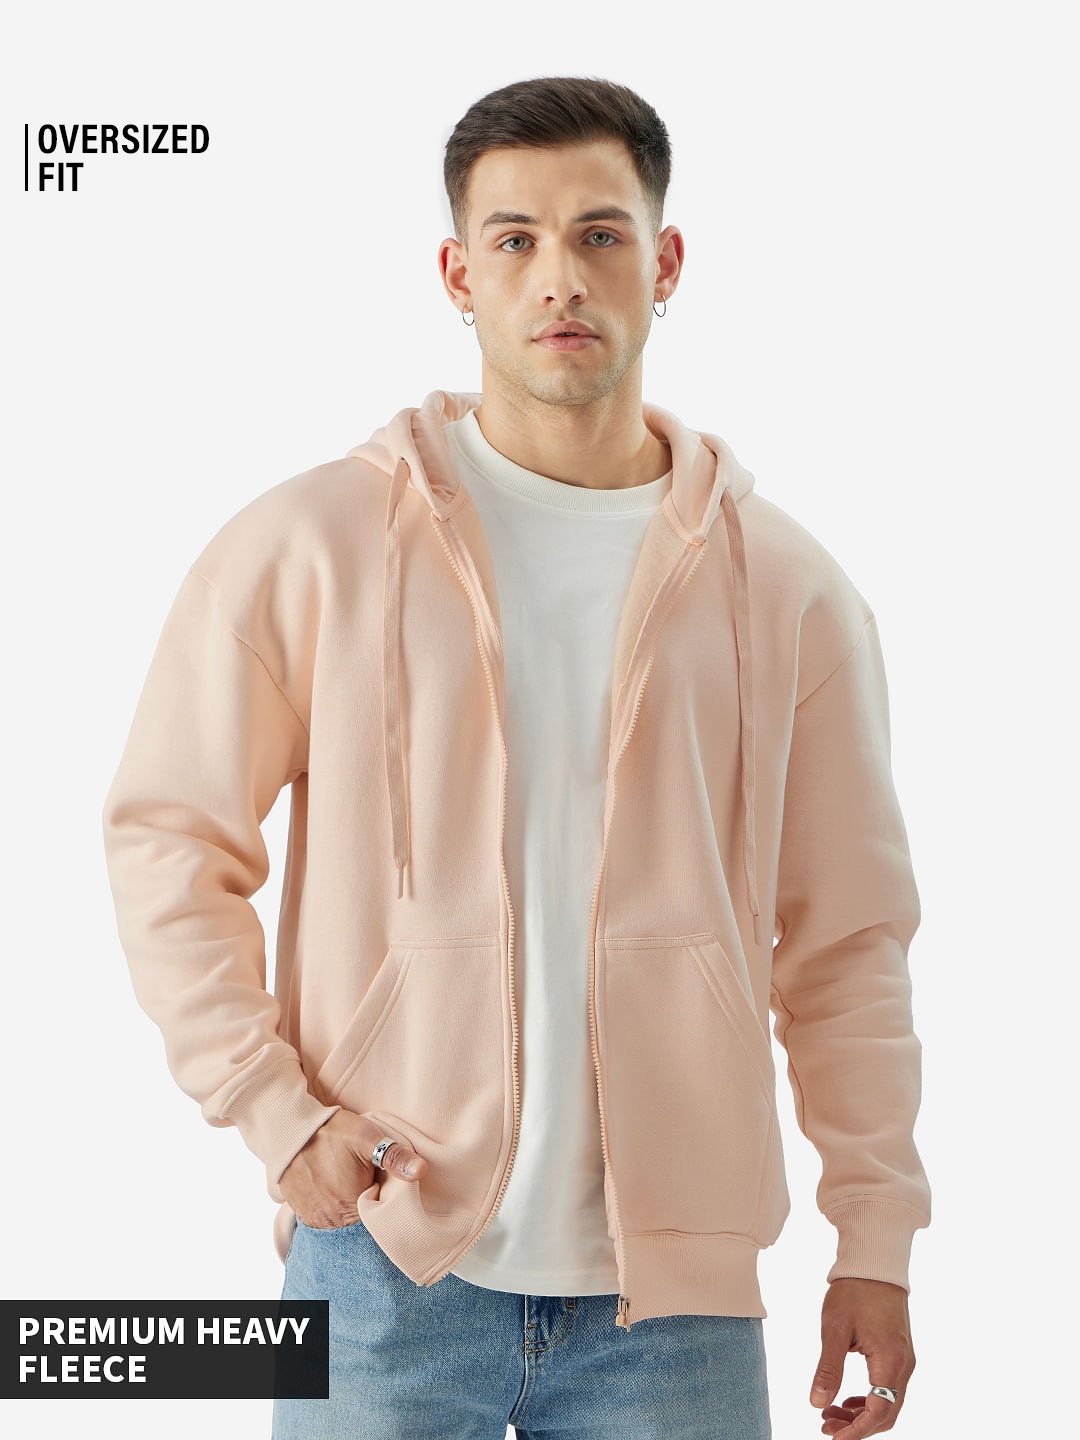 The Souled Store | Men's Solids: Pink Men's Oversized Hoodie